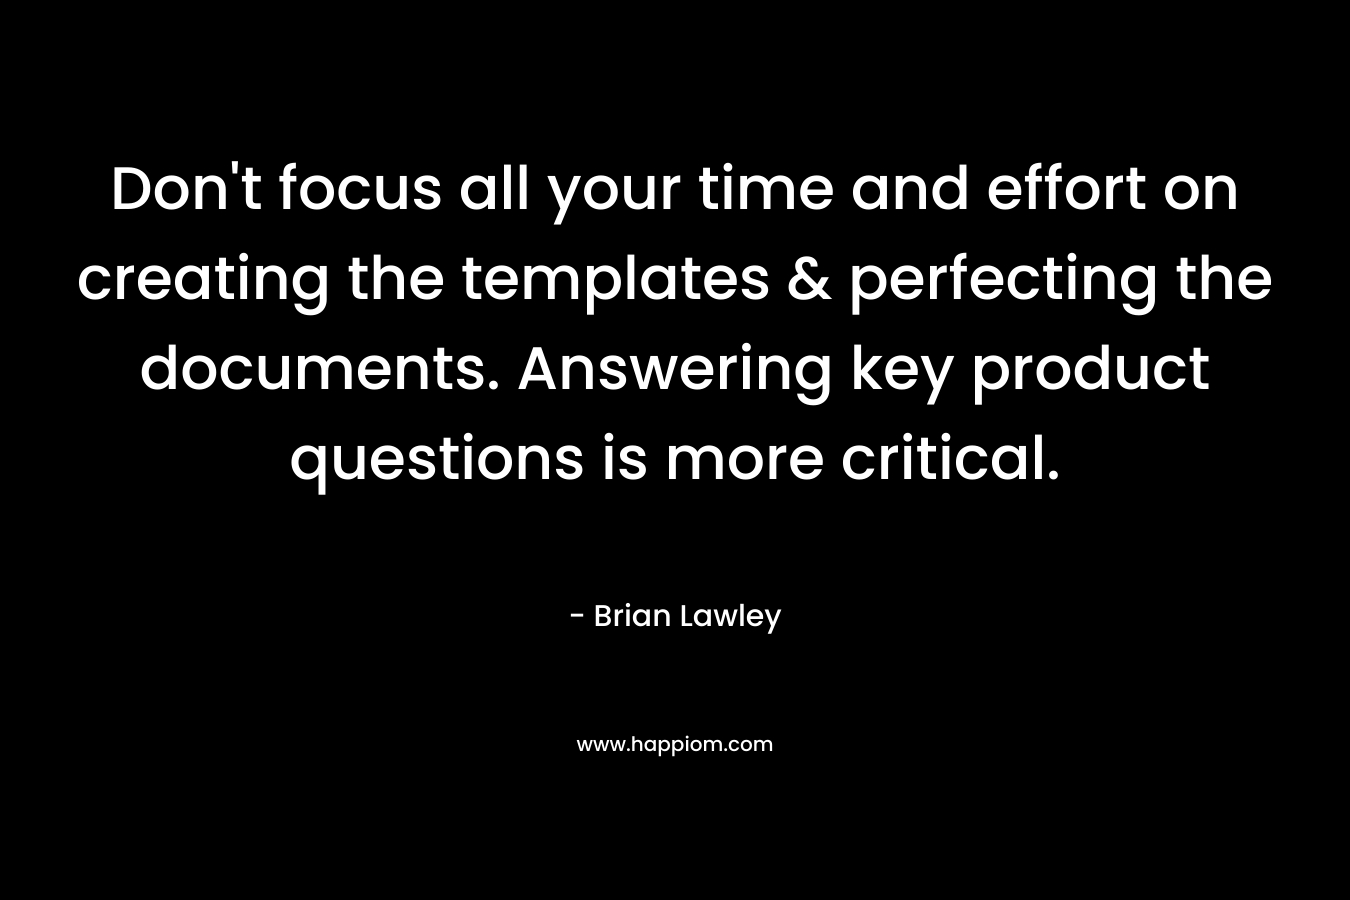 Don’t focus all your time and effort on creating the templates & perfecting the documents. Answering key product questions is more critical. – Brian Lawley